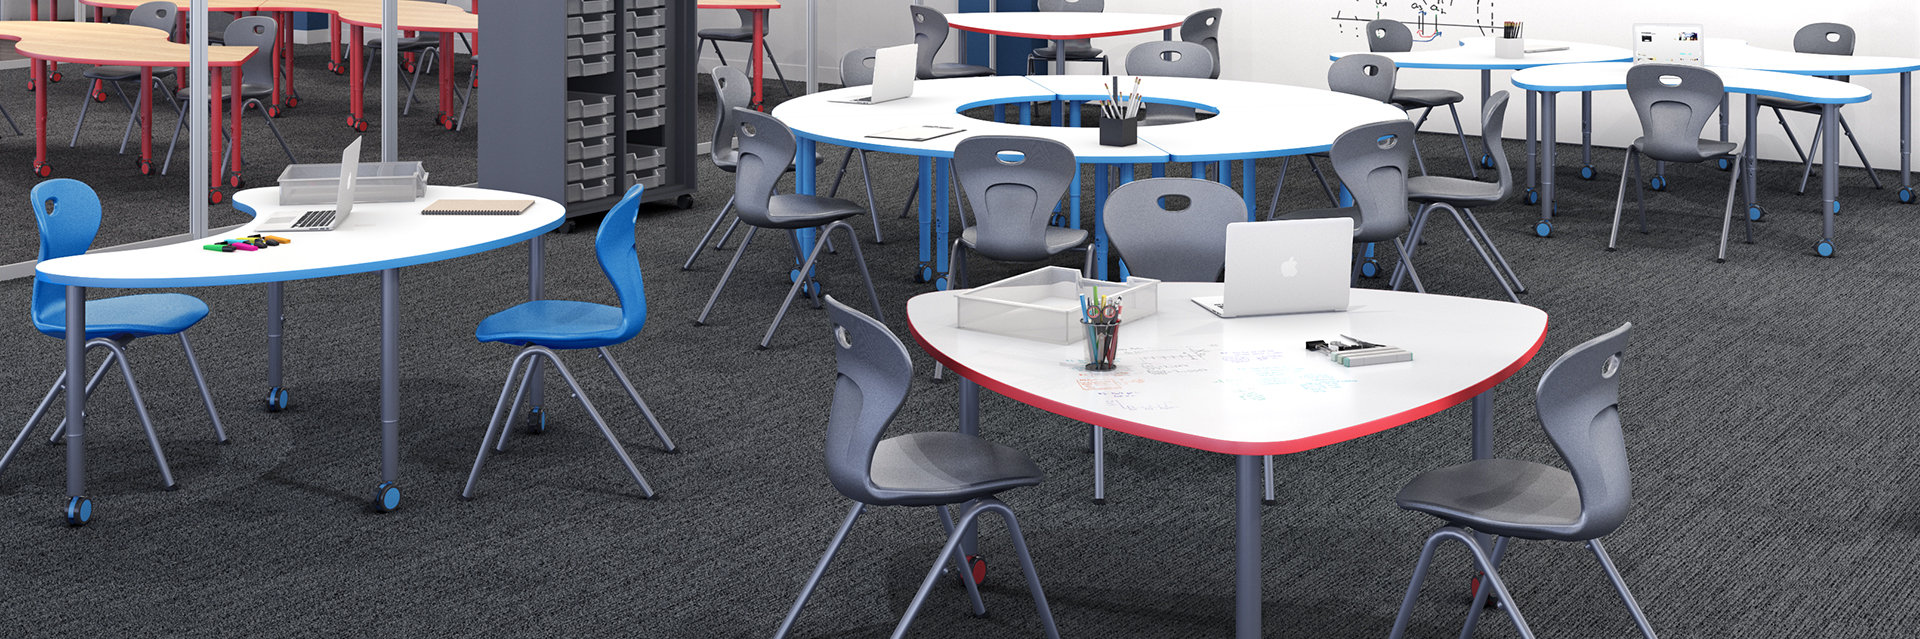 A collaborative classroom featuring collaborative desks and student chairs by Allied